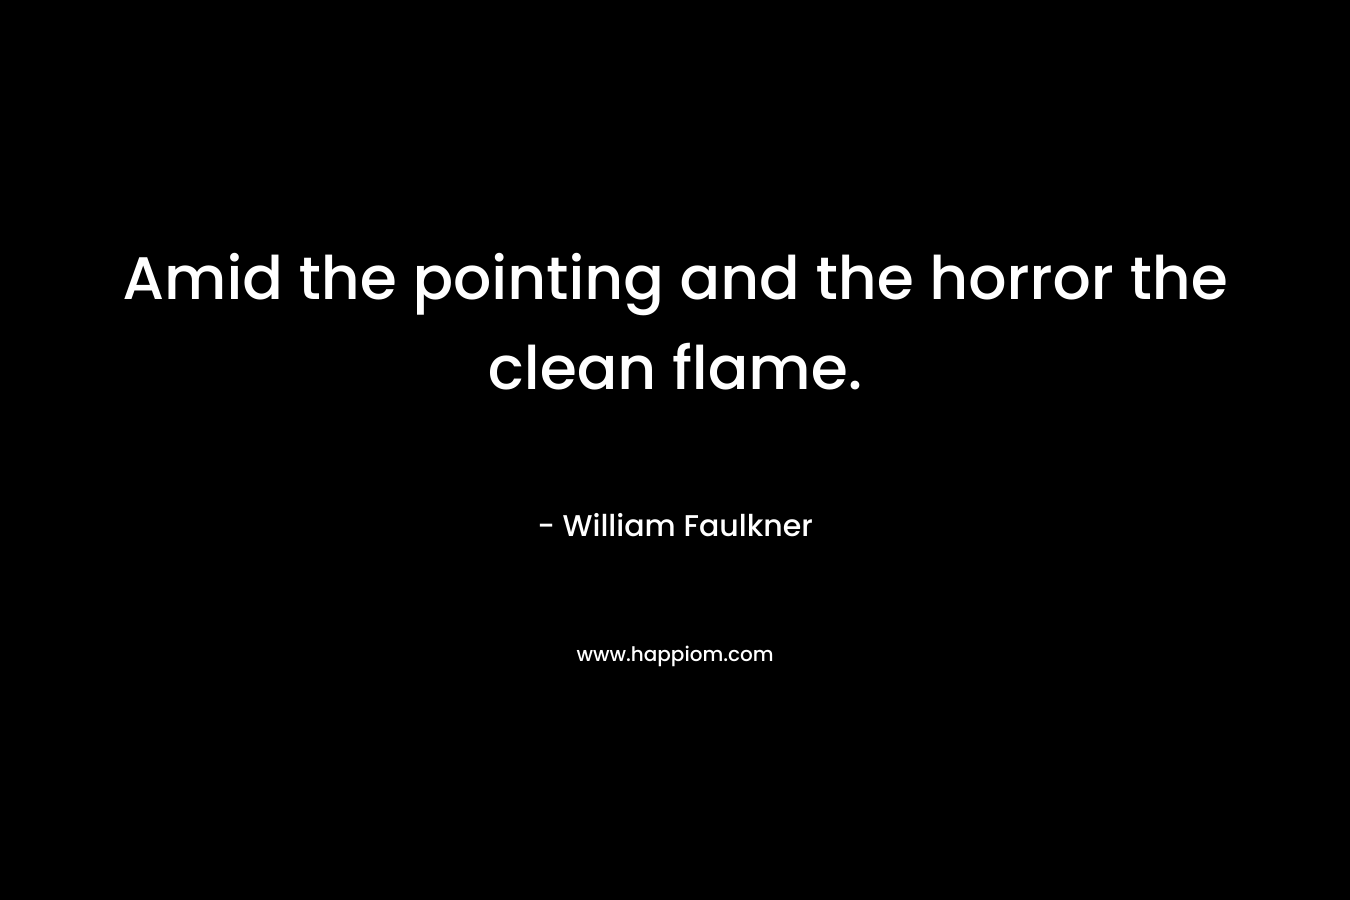 Amid the pointing and the horror the clean flame. – William Faulkner